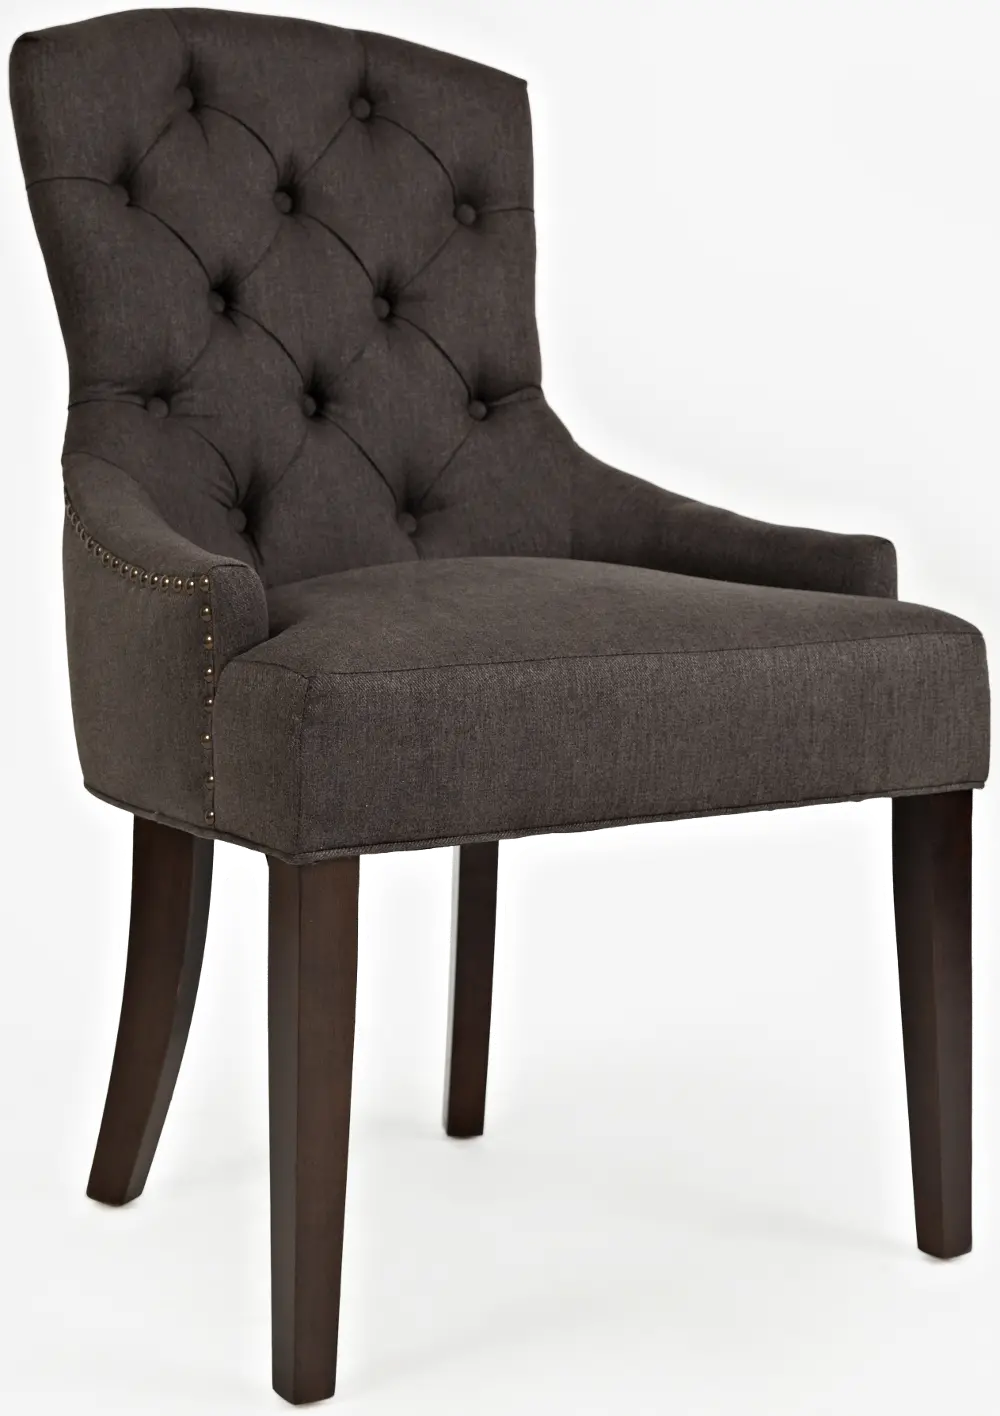 Charcoal Gray Button-Tufted Upholstered Dining Chair - Gramercy-1